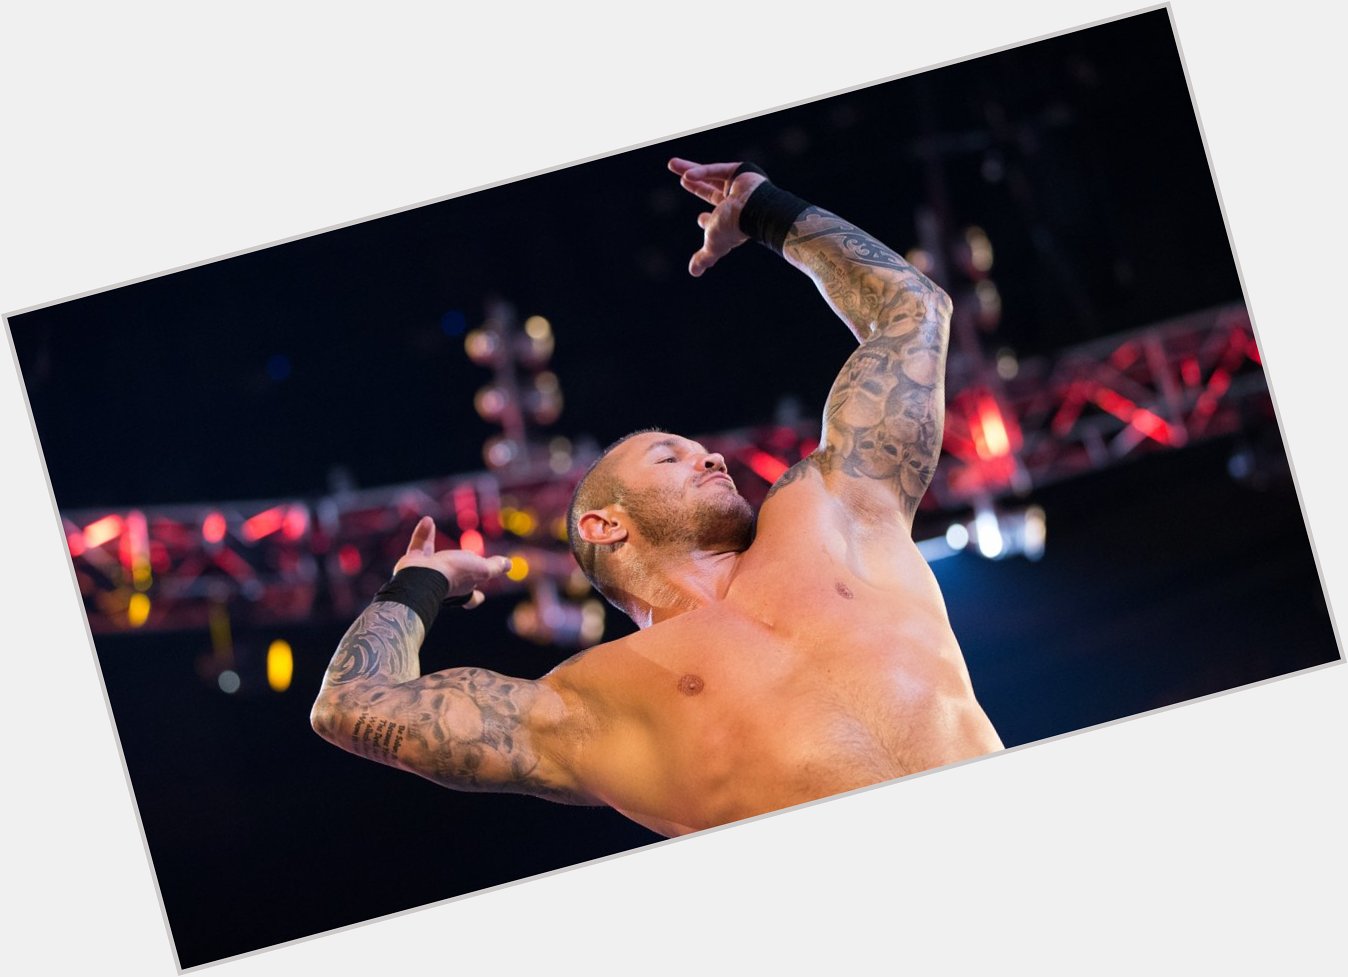 Happy 60th birthday to \"The Viper\" Randy Orton! I hope you get some birthday cake outta nowhere! 